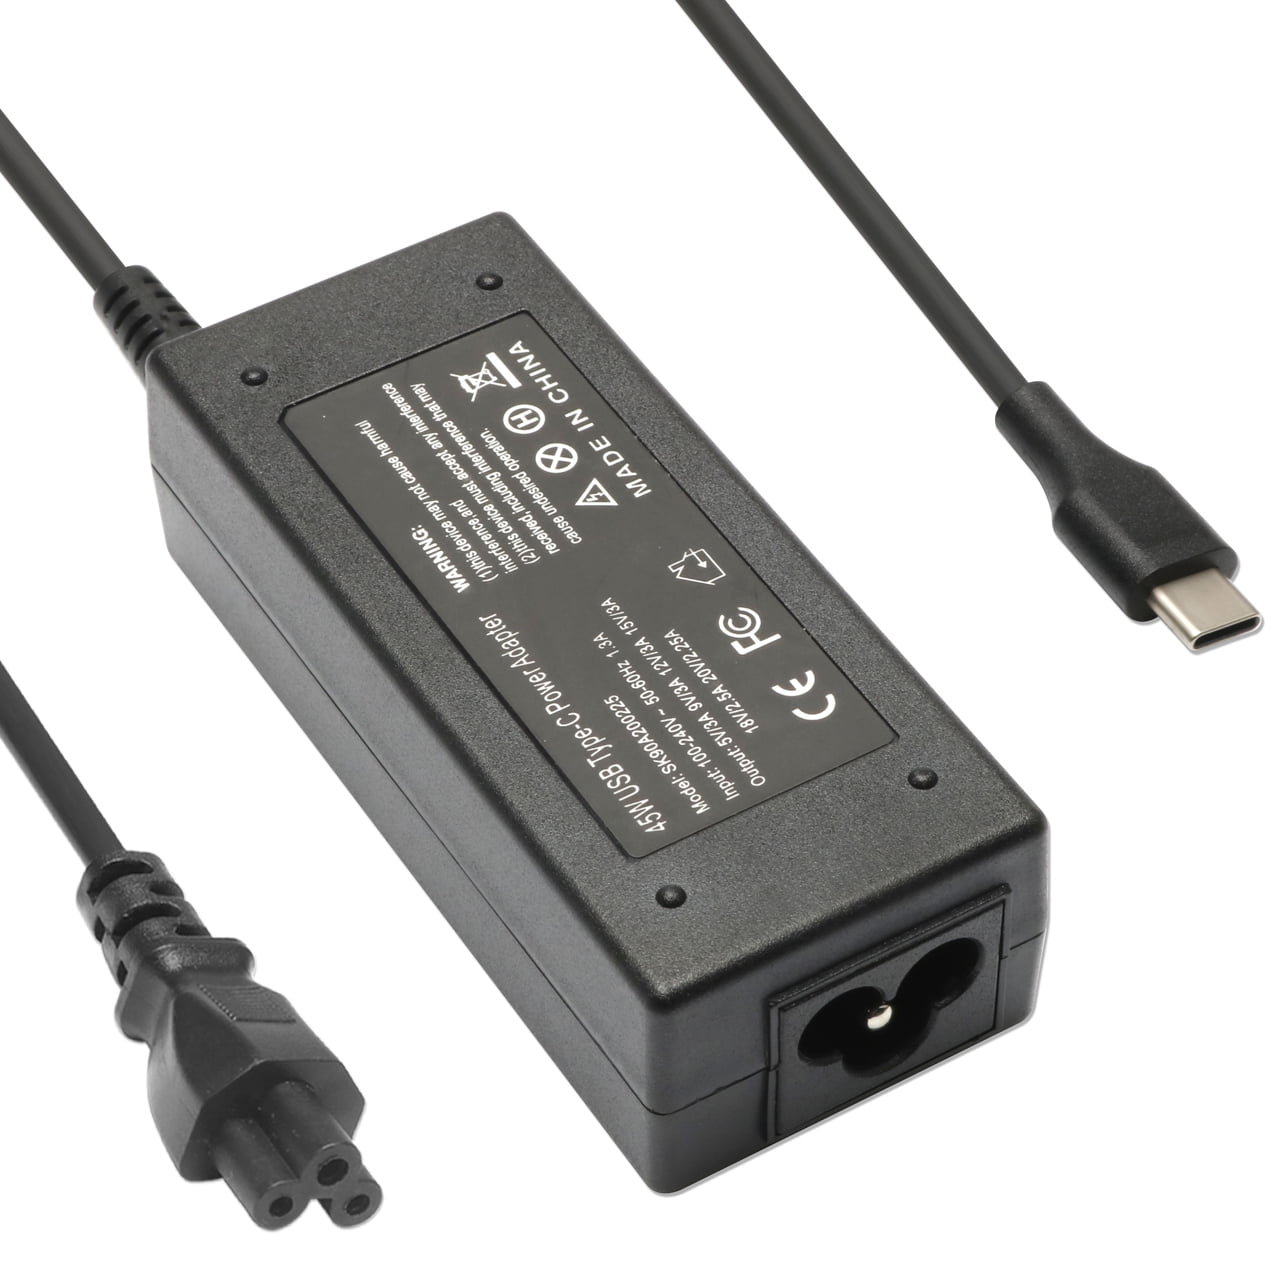 45W Type C USB Laptop Compatible with HP Chromebook Charger,USB C Laptop Charger,Type C Chromebook Chargerand Type C Charger Other Brands Laptop - Walmart.com